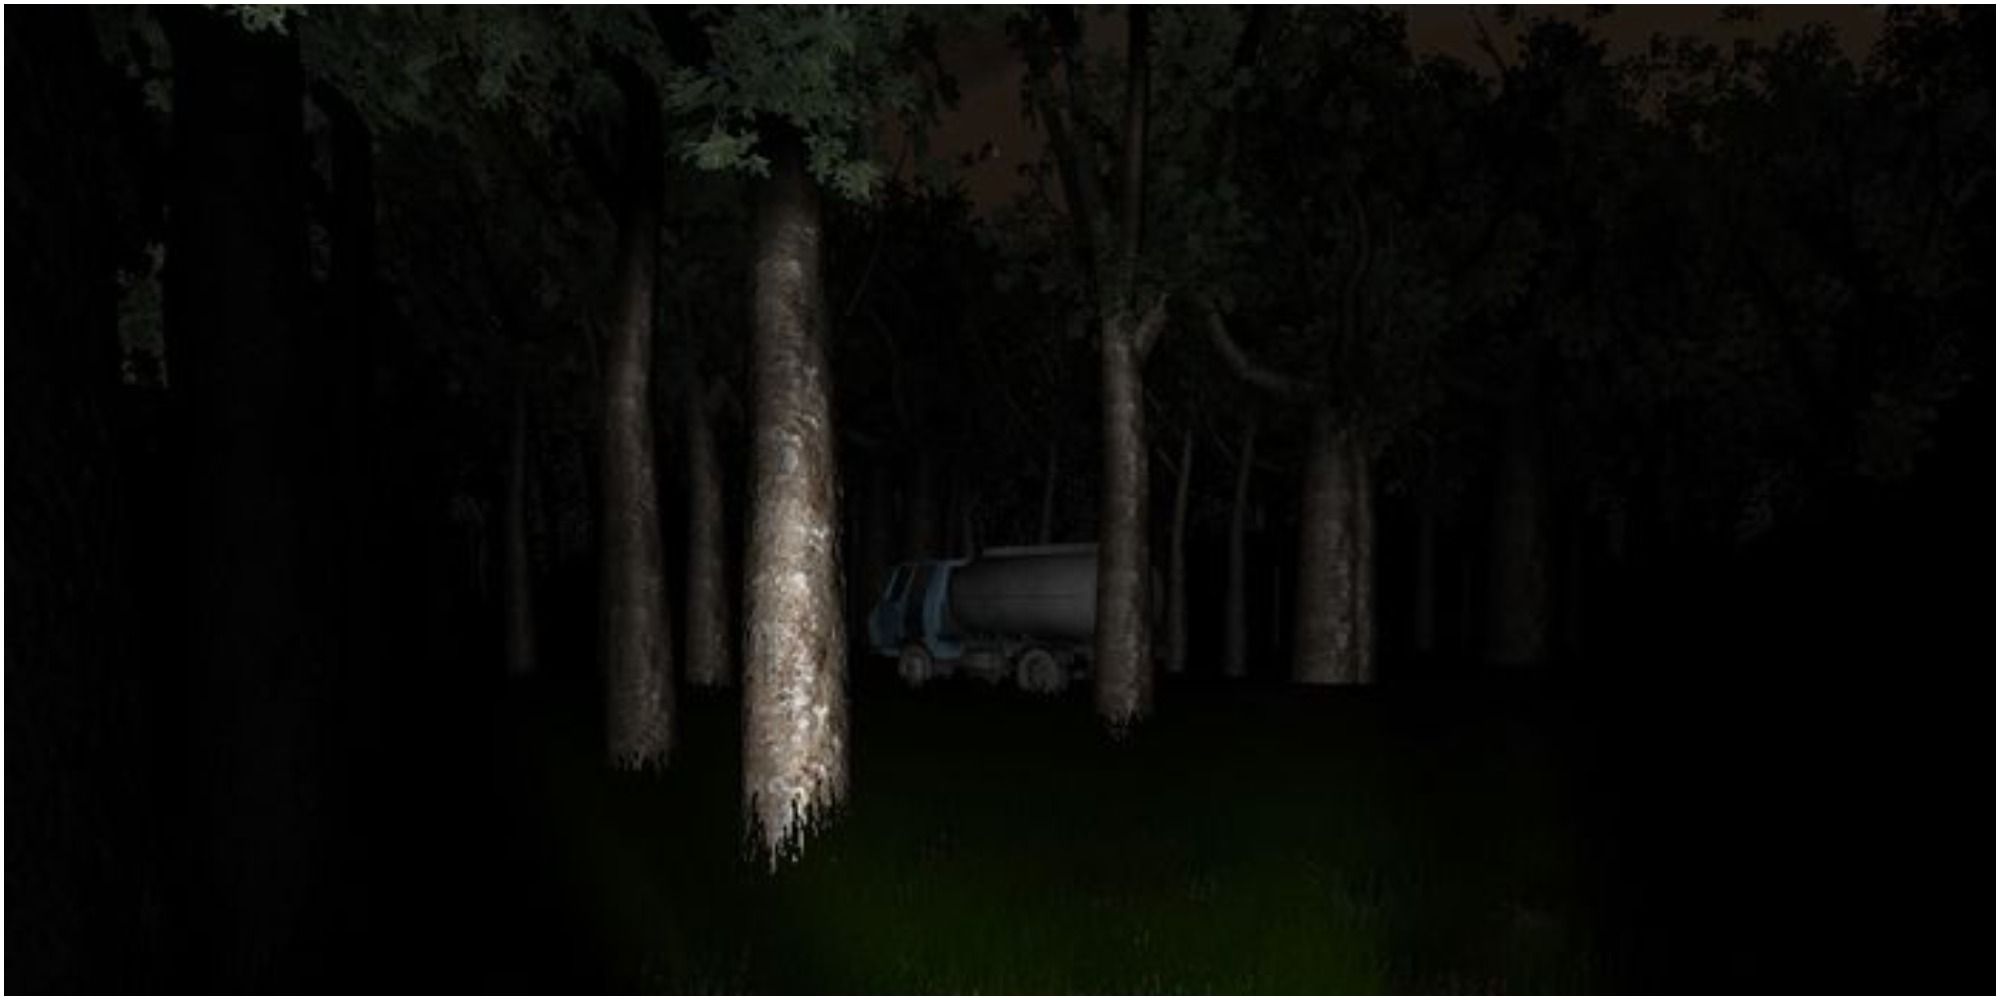 A blue and grey truck in the woods, one of the locations in Slender: The Eight Pages